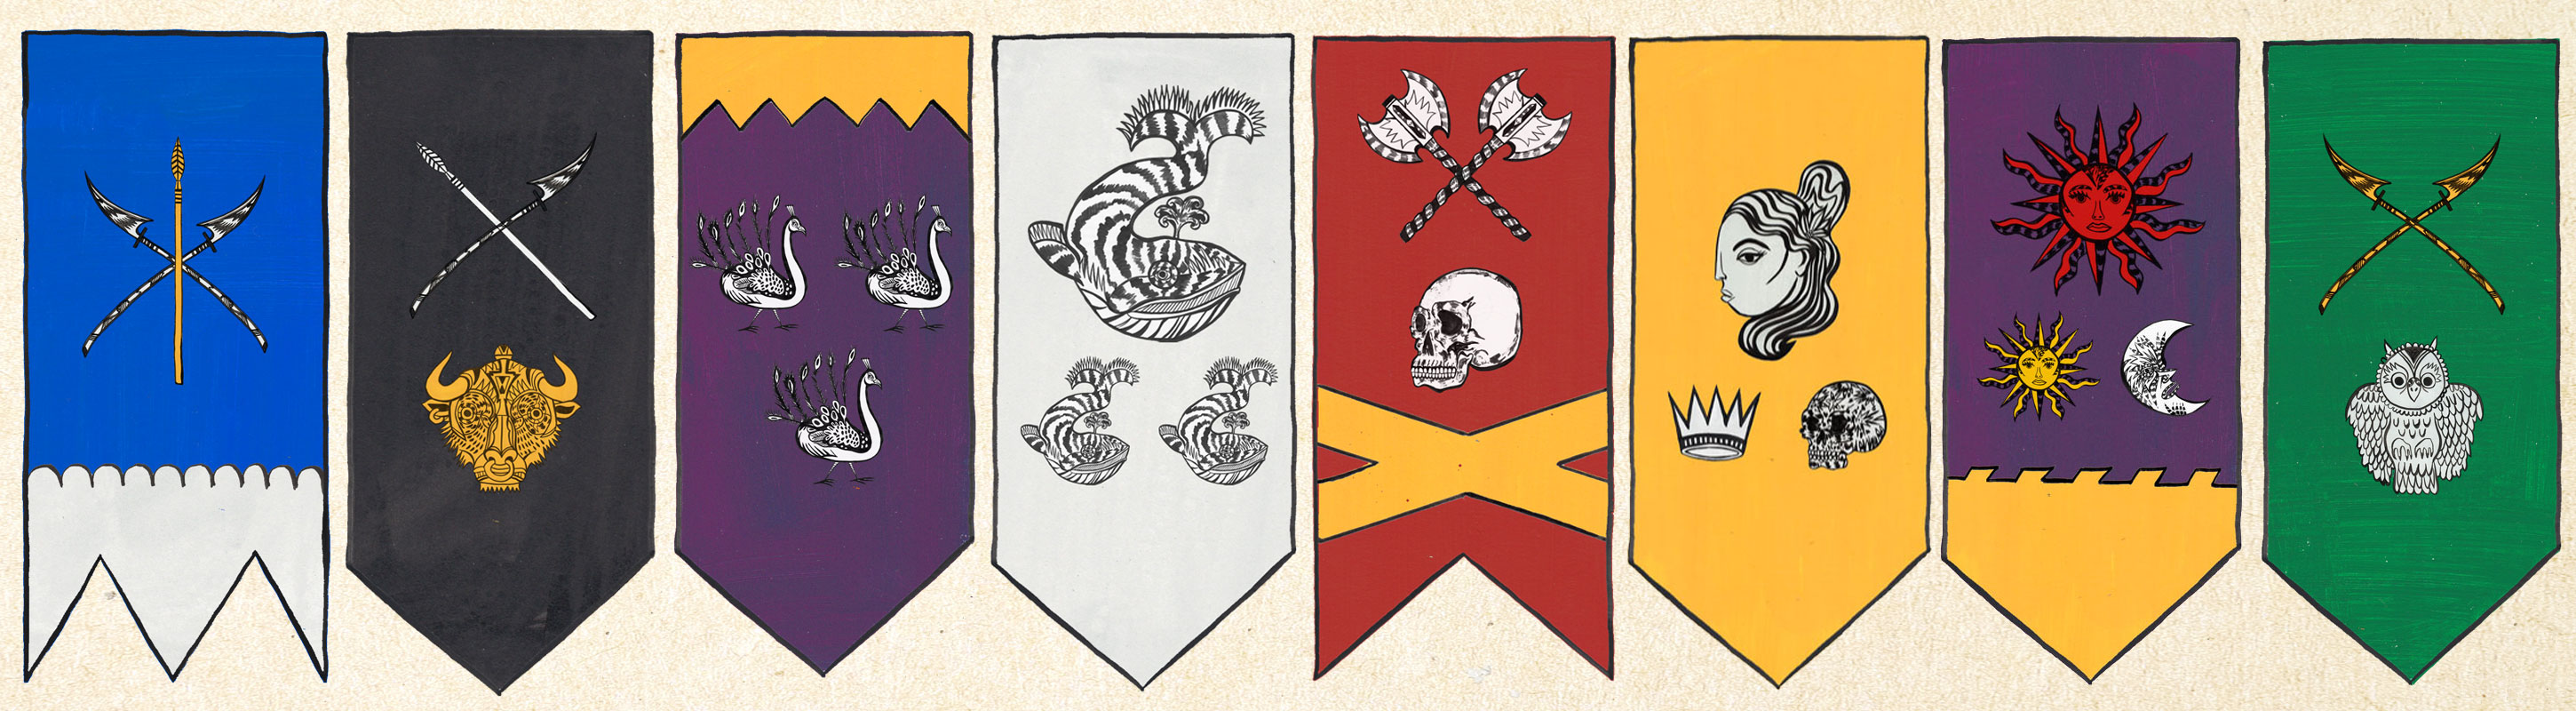 The Painted Banners (for Adventurers)